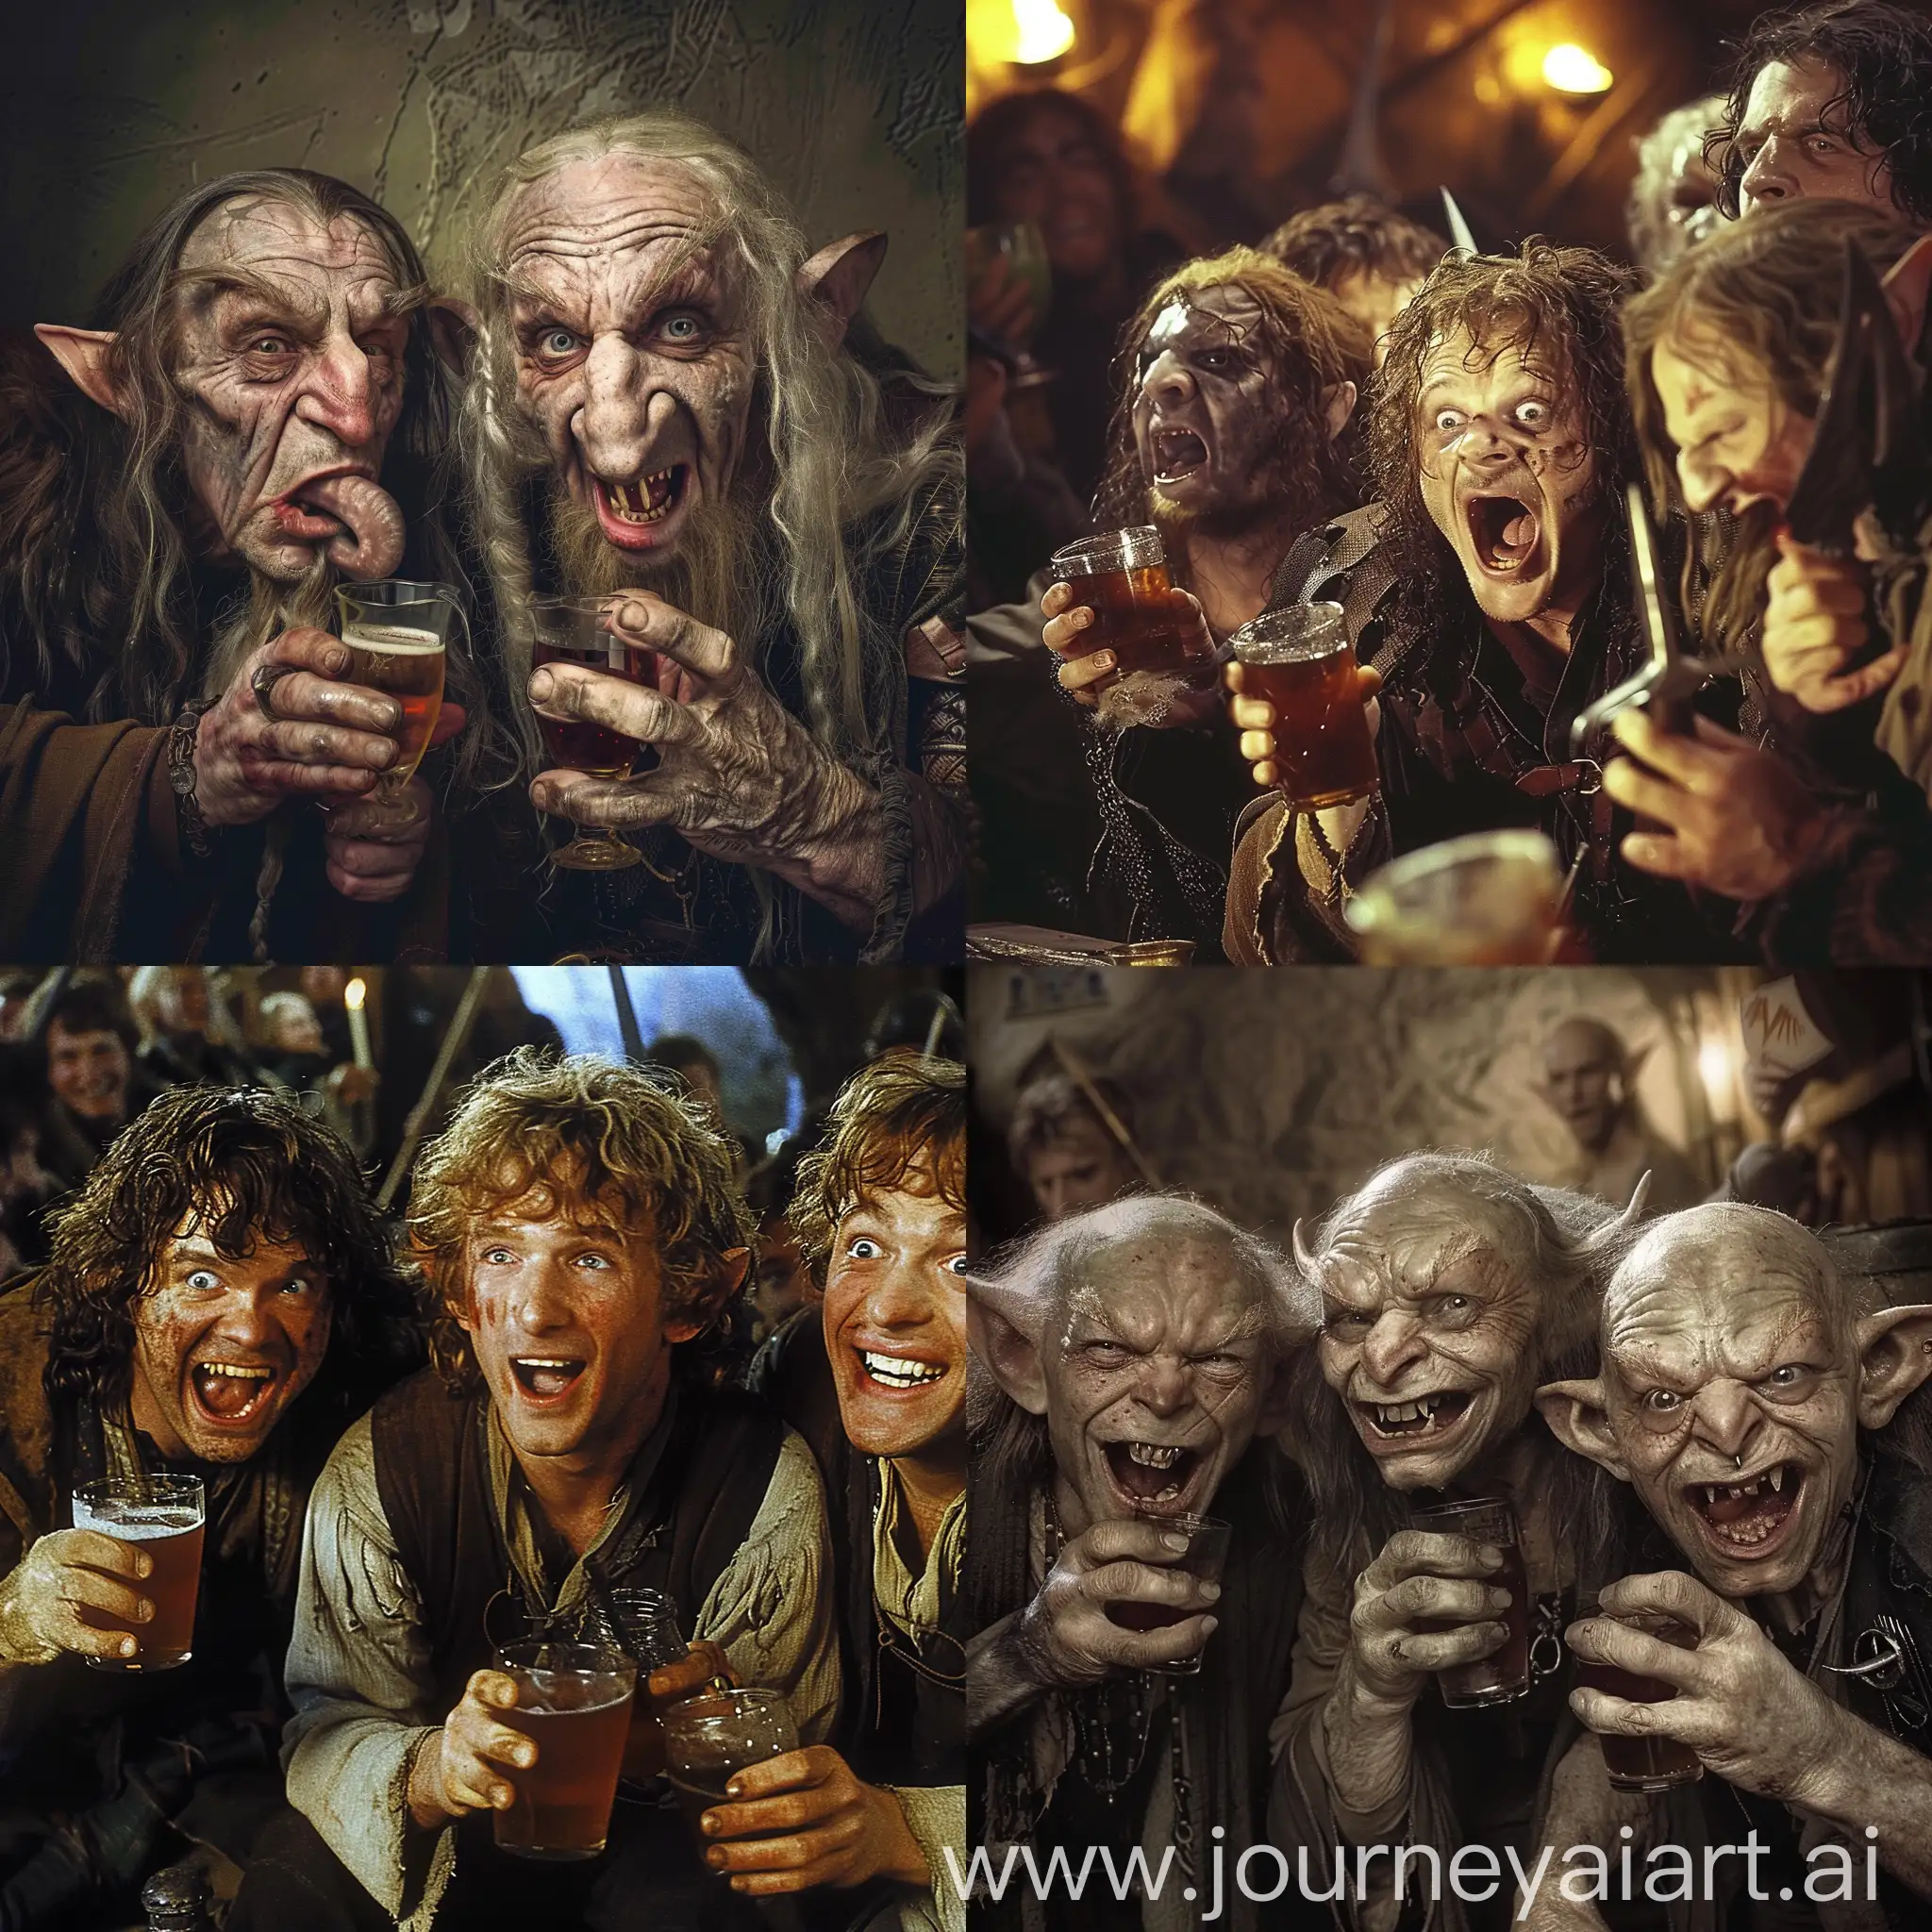 lord of the rings Friday night, movie characters as drunk acting crazy on photos